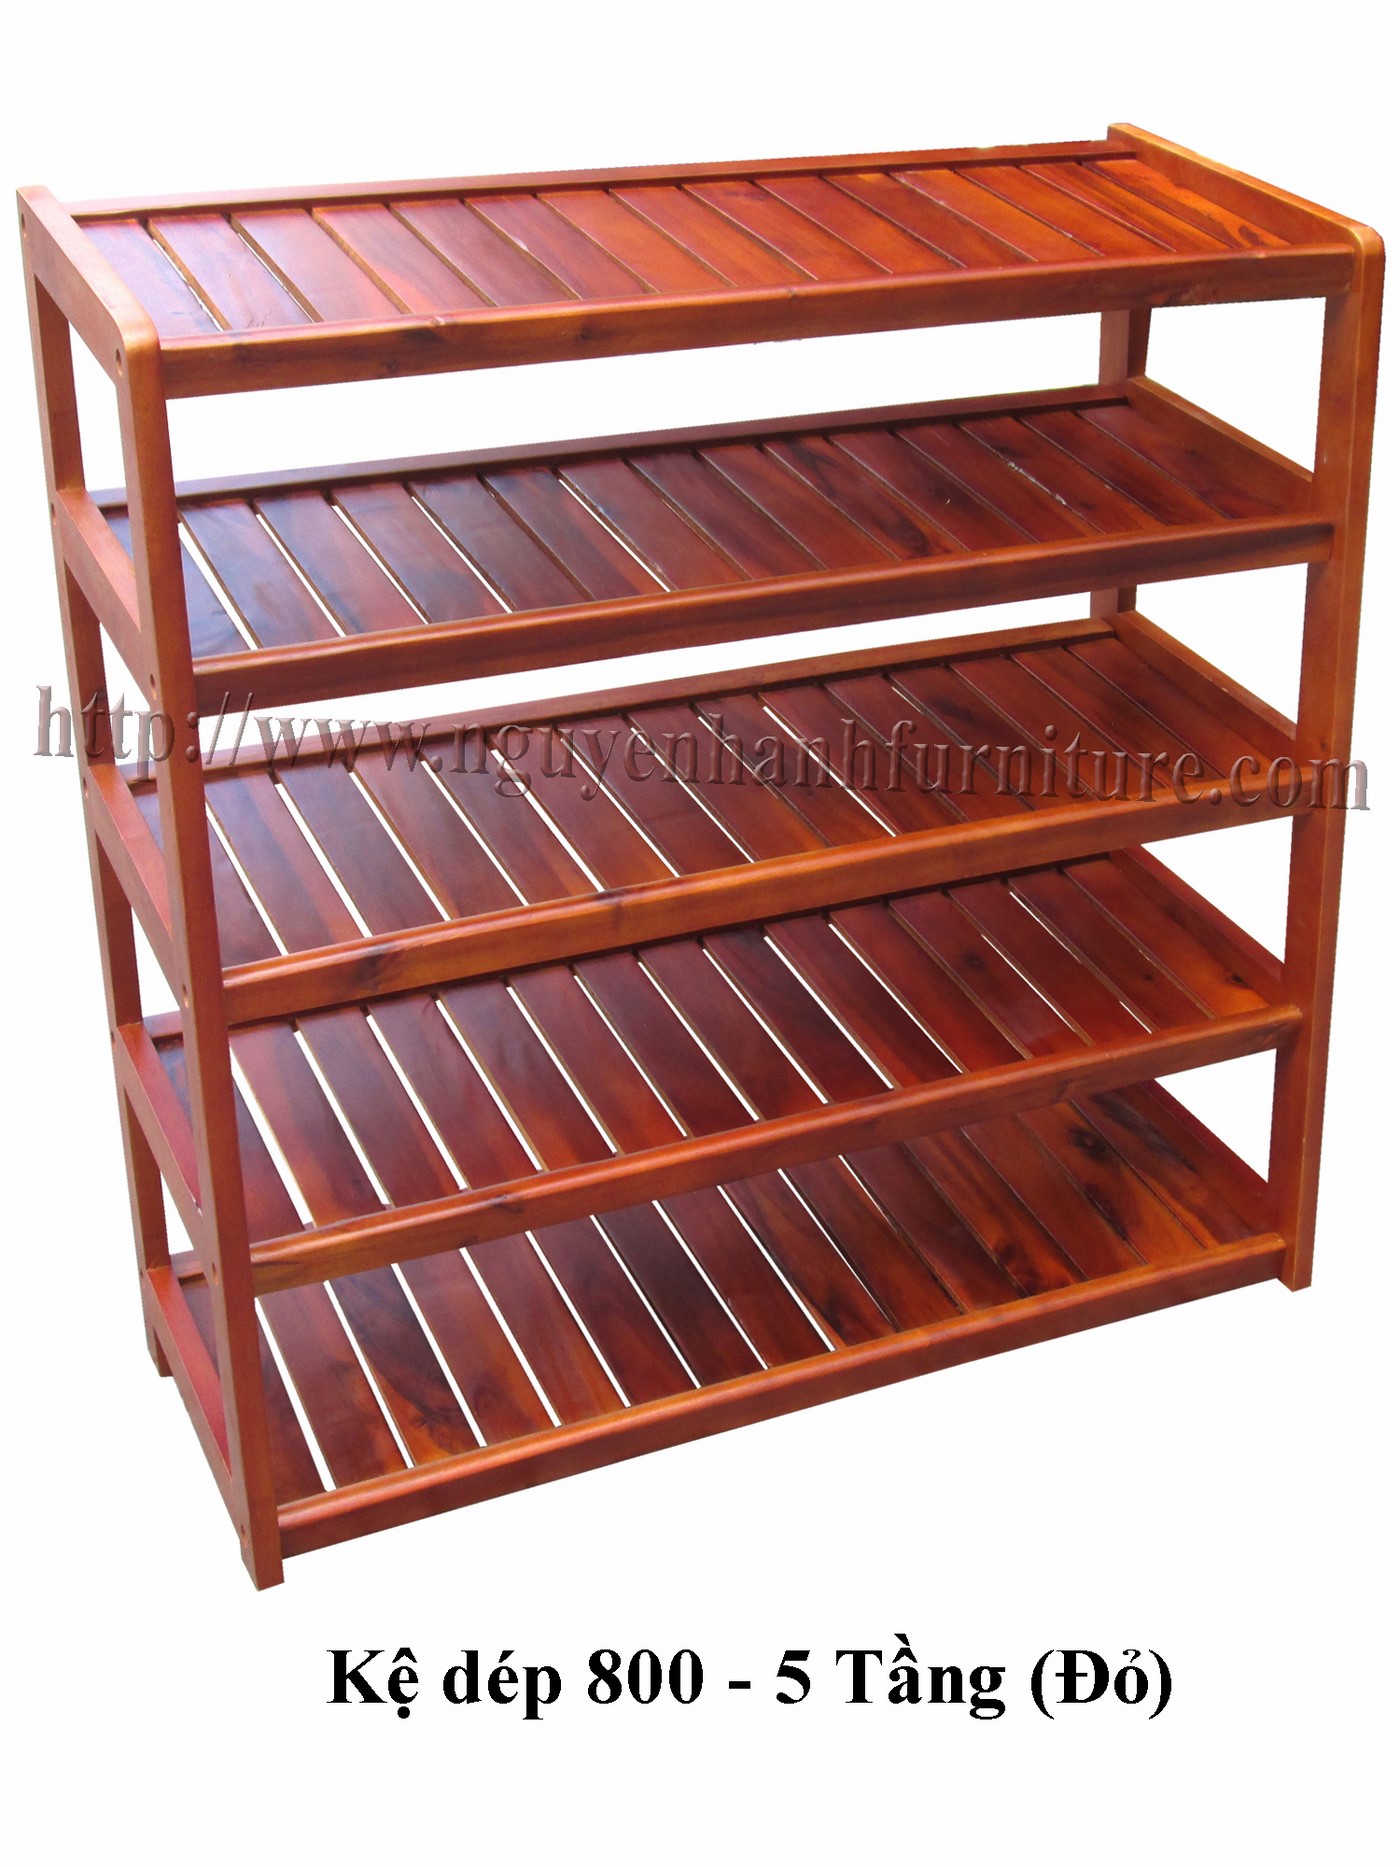 Name product: Shoeshelf 5 Floors 80 with sparse blades (Red) - Dimensions: 80 x 30 x 82 (H) - Description: Wood natural rubber